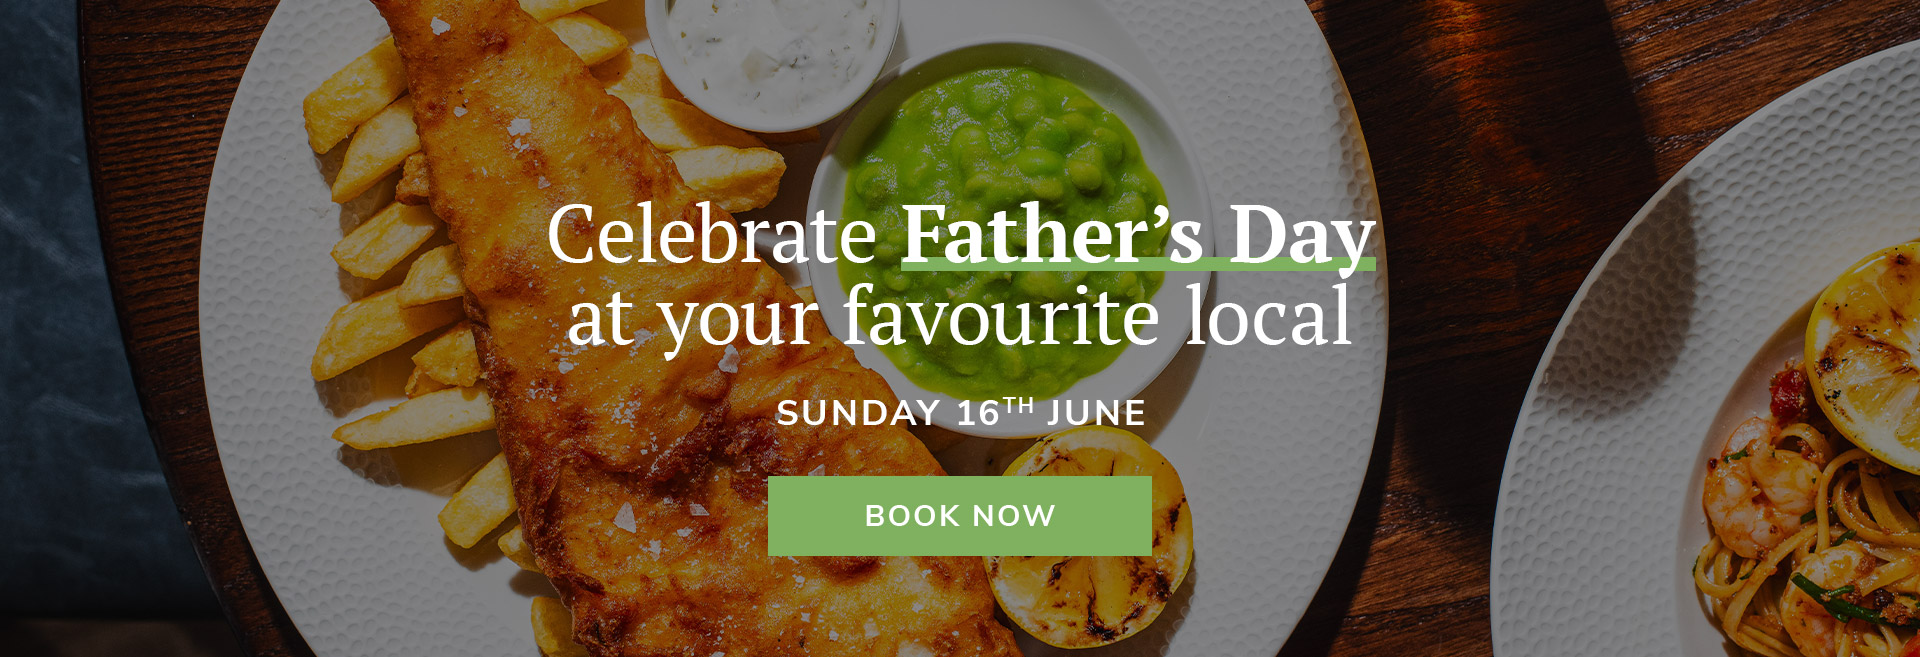 Father's Day at The Gipsy Moth